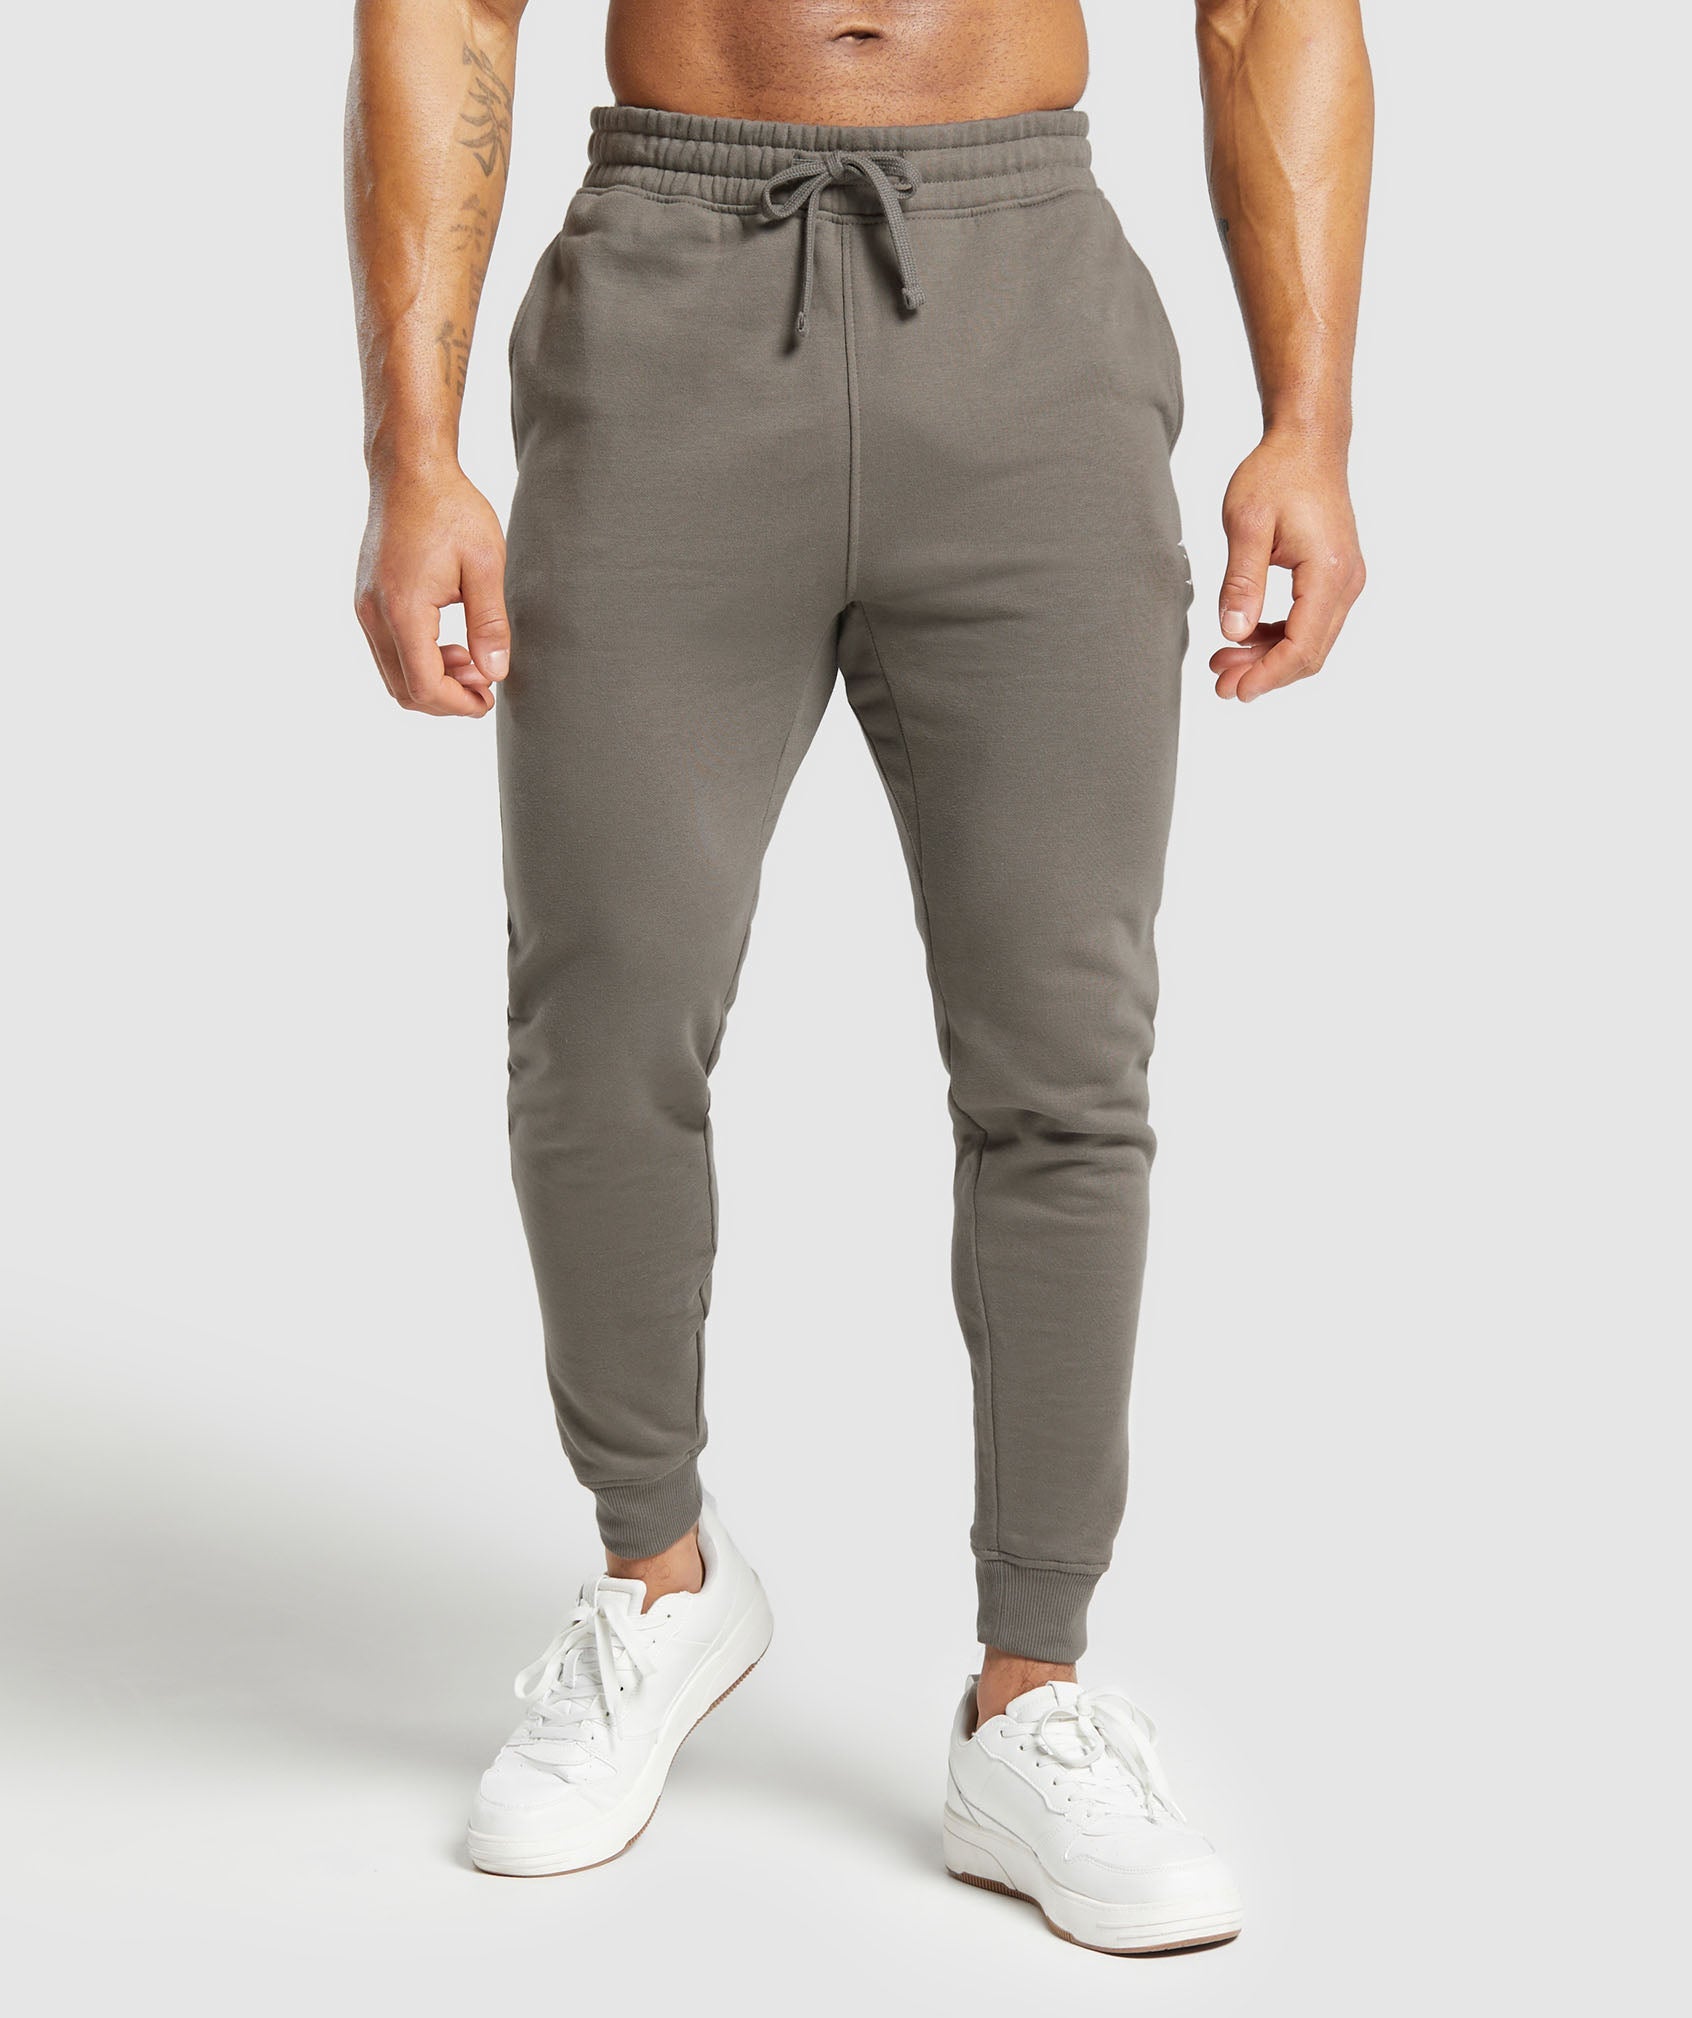 Crest Joggers in Camo Brown